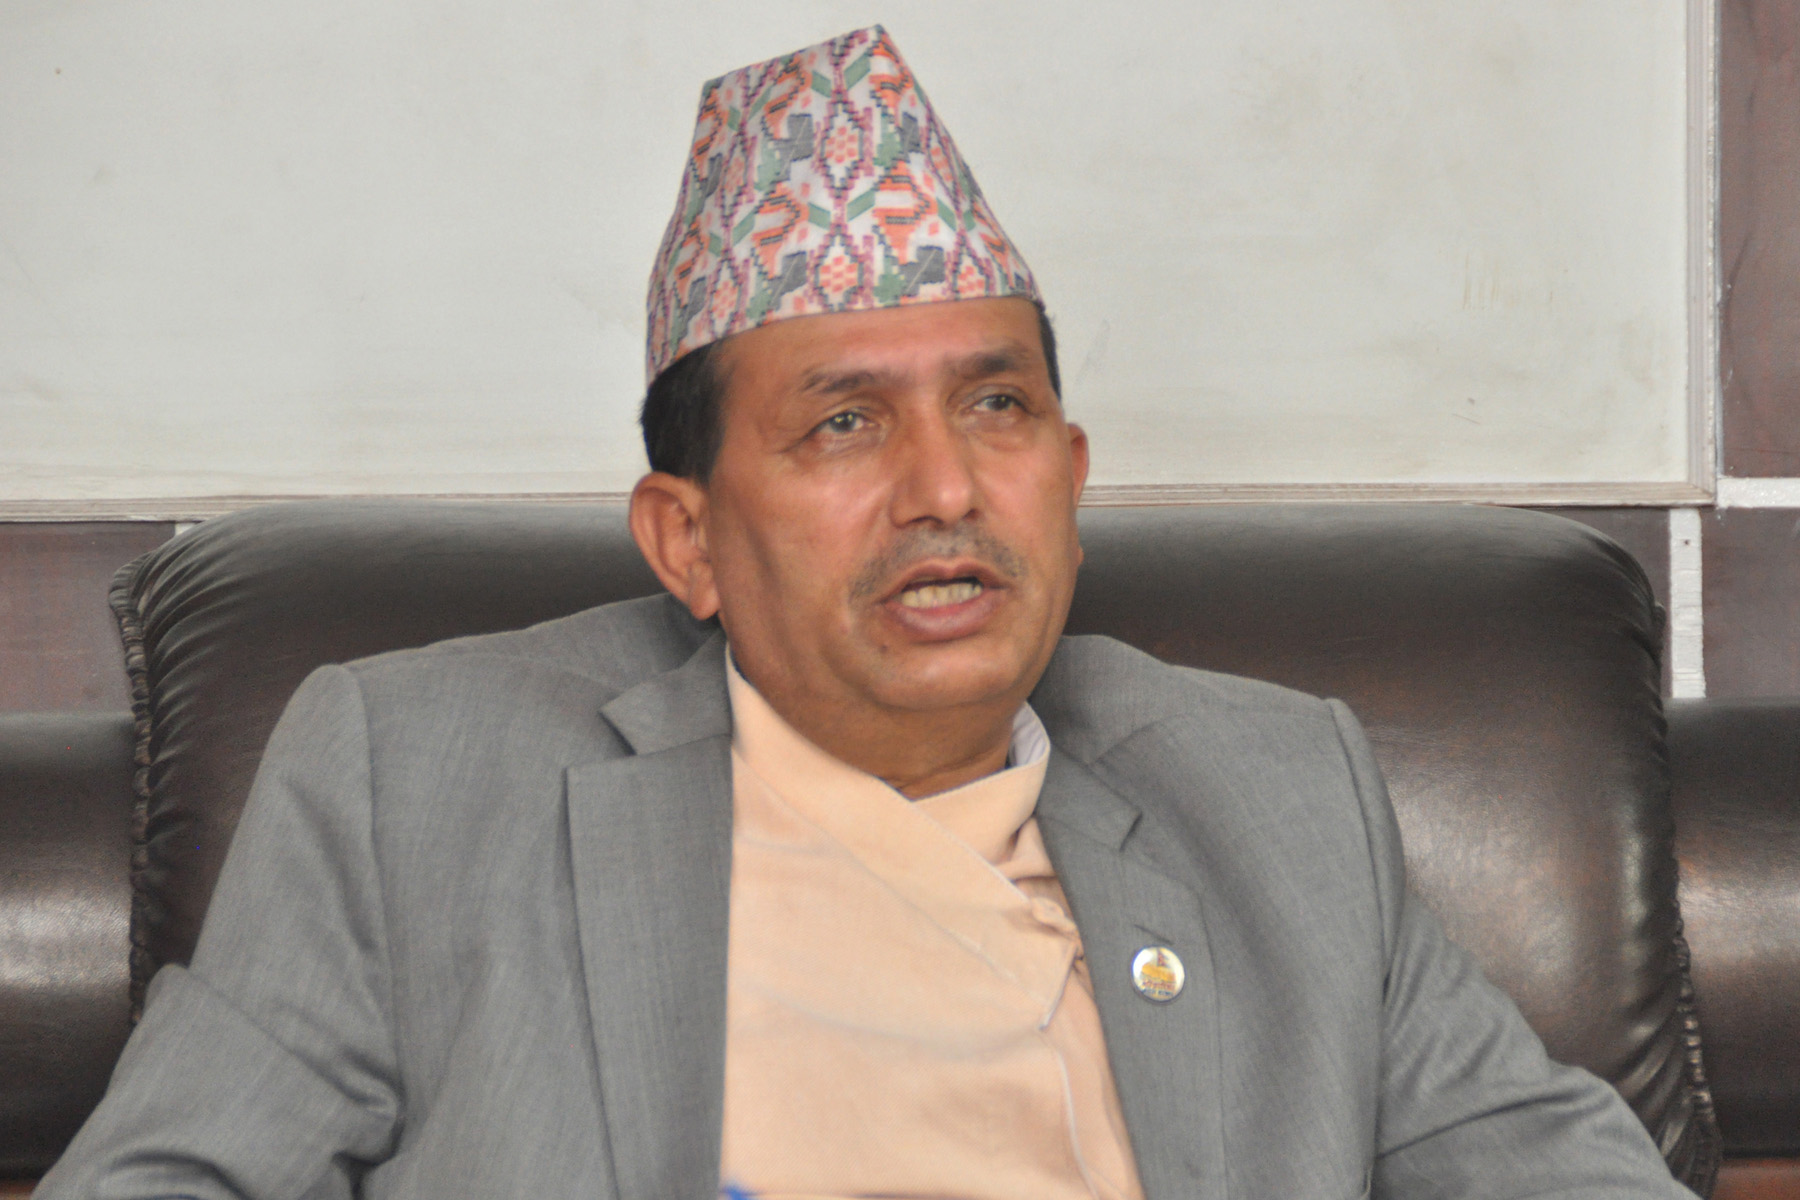 94 pc COVID-19 cases in Nepal are imported: Health Minister Dhakal